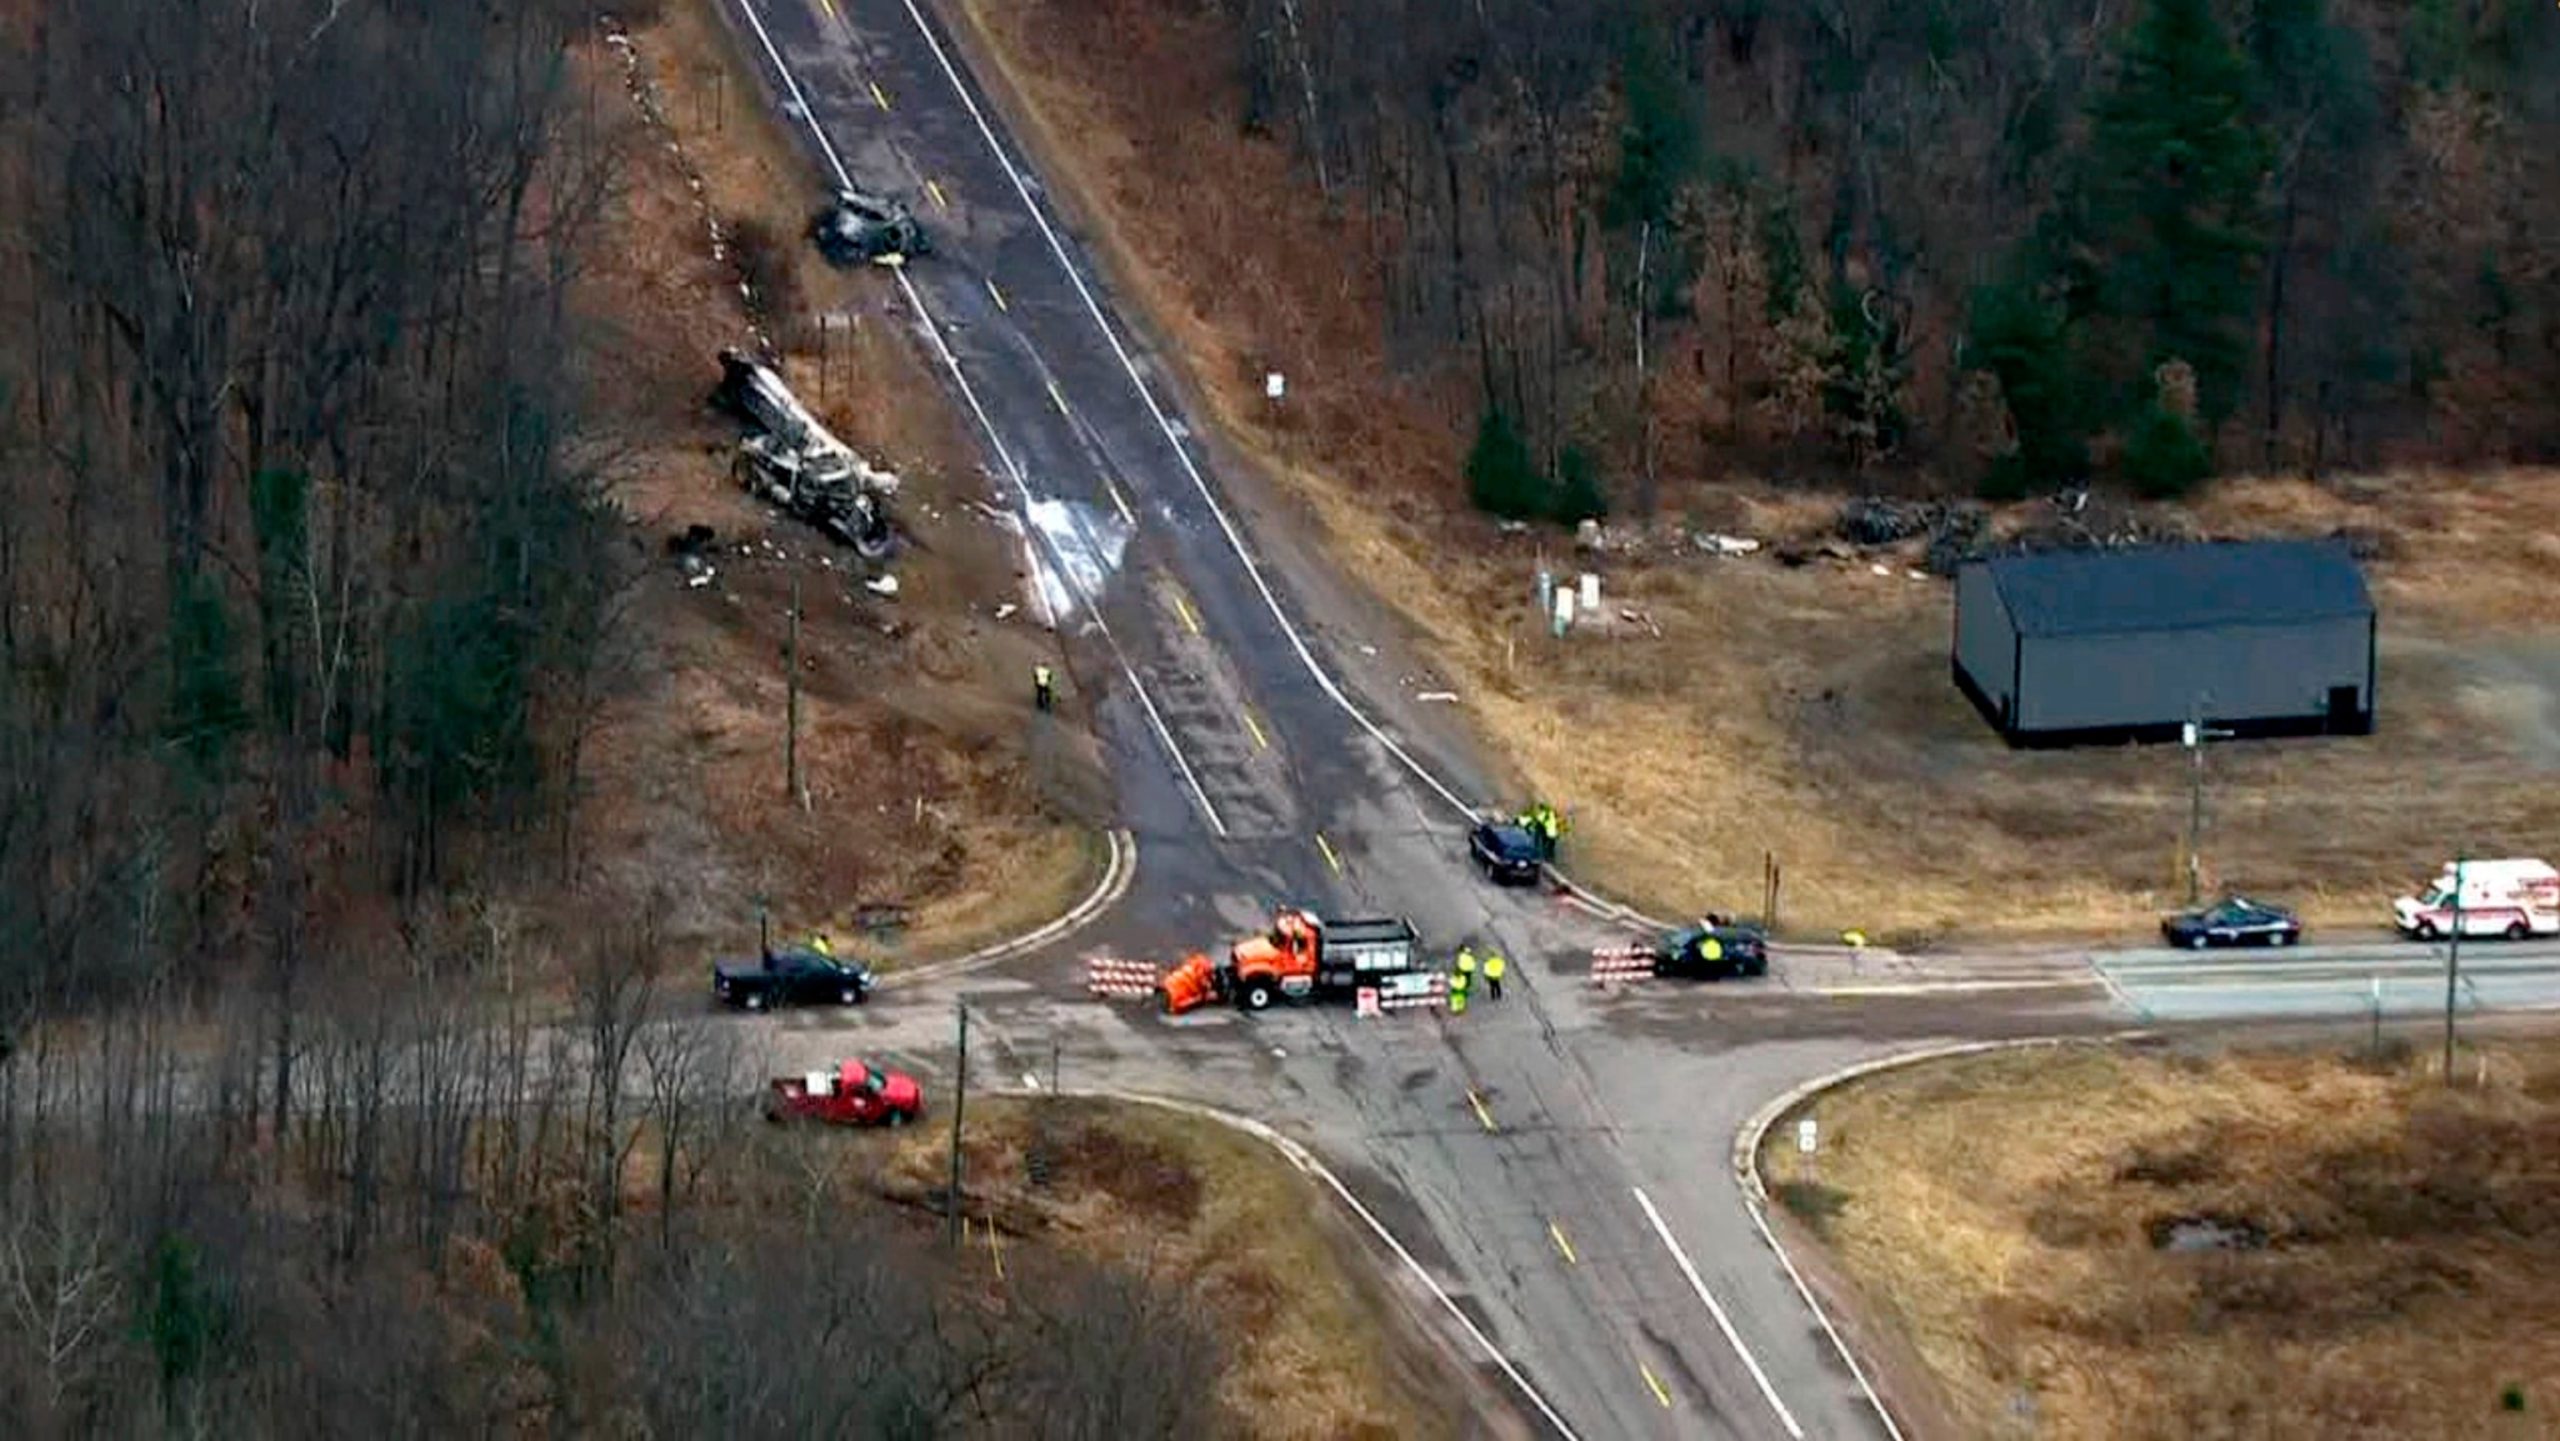 Identification of victims and new details revealed in fatal Wisconsin intersection crash